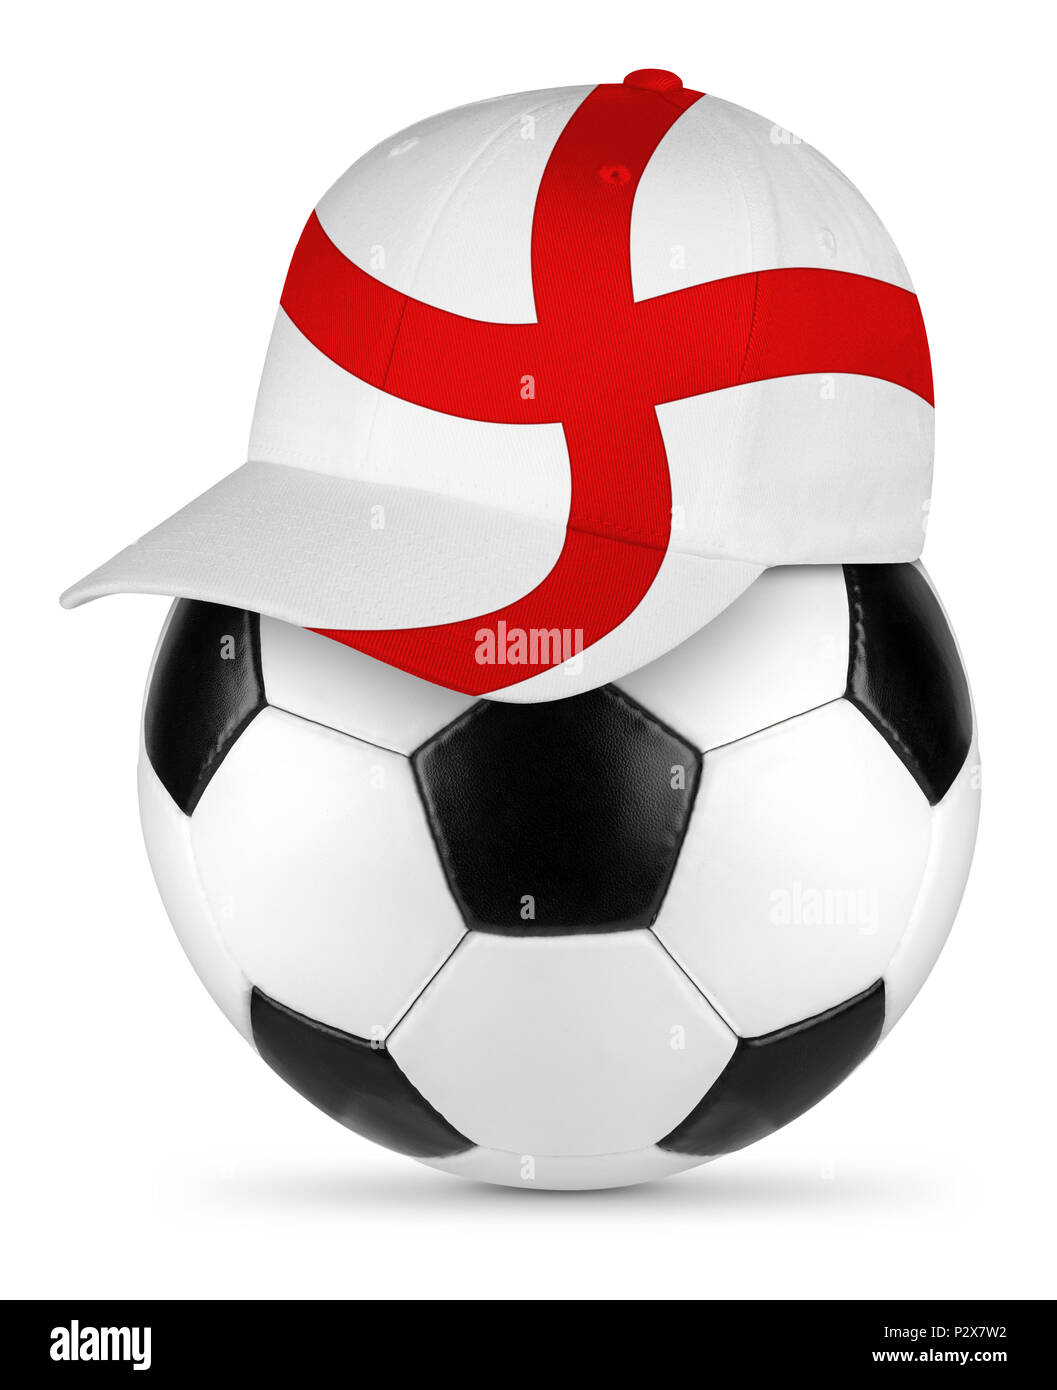 Classic black white leather soccer ball with england english flag baseball fan cap isolated background sport football concept Stock Photo